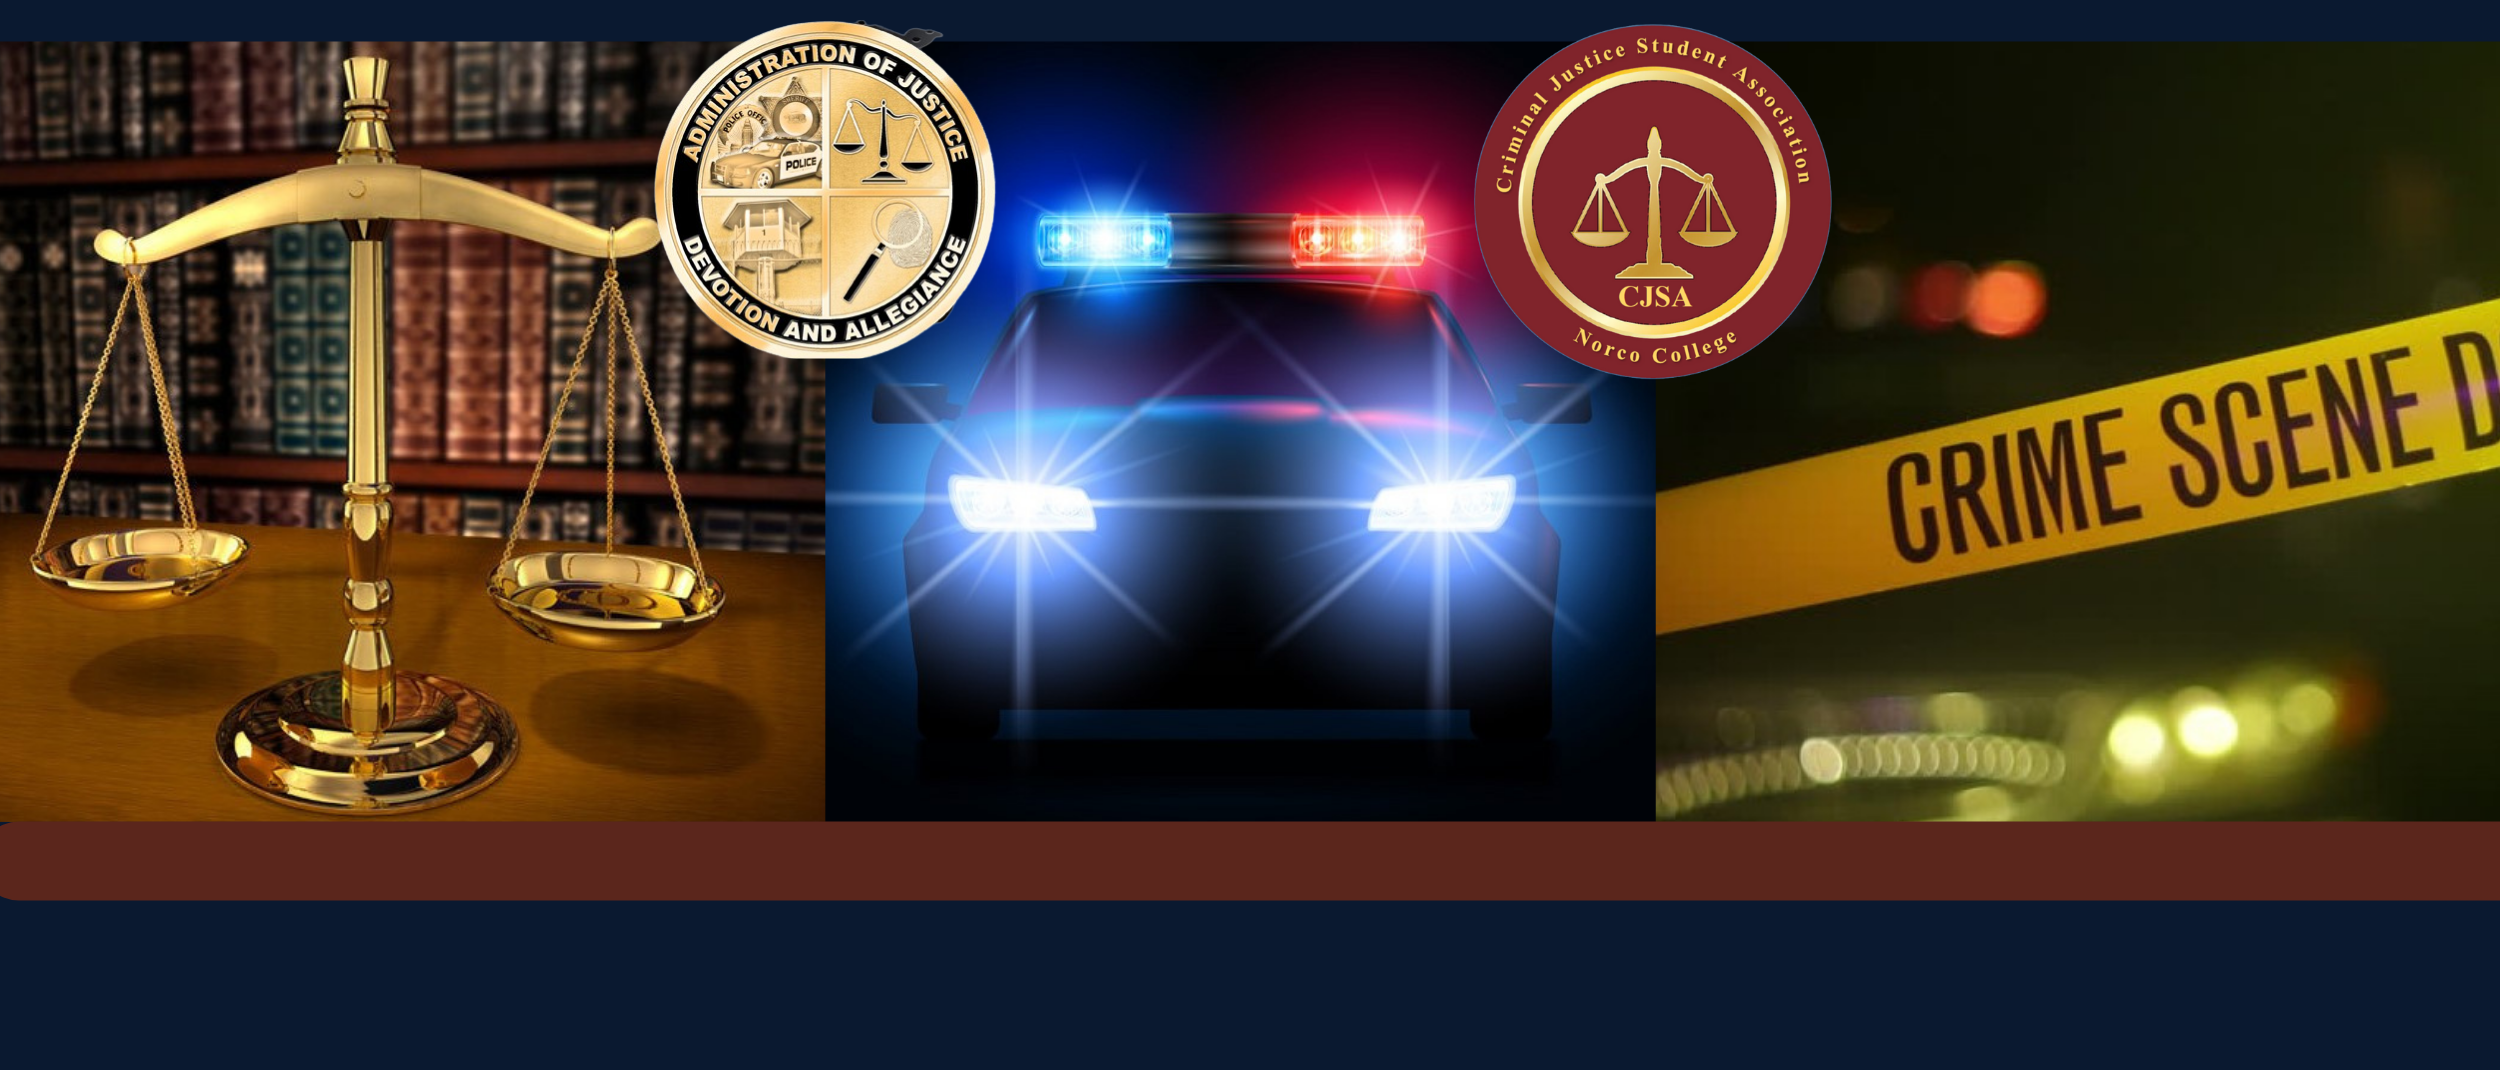 Administration of Justice hero image banner